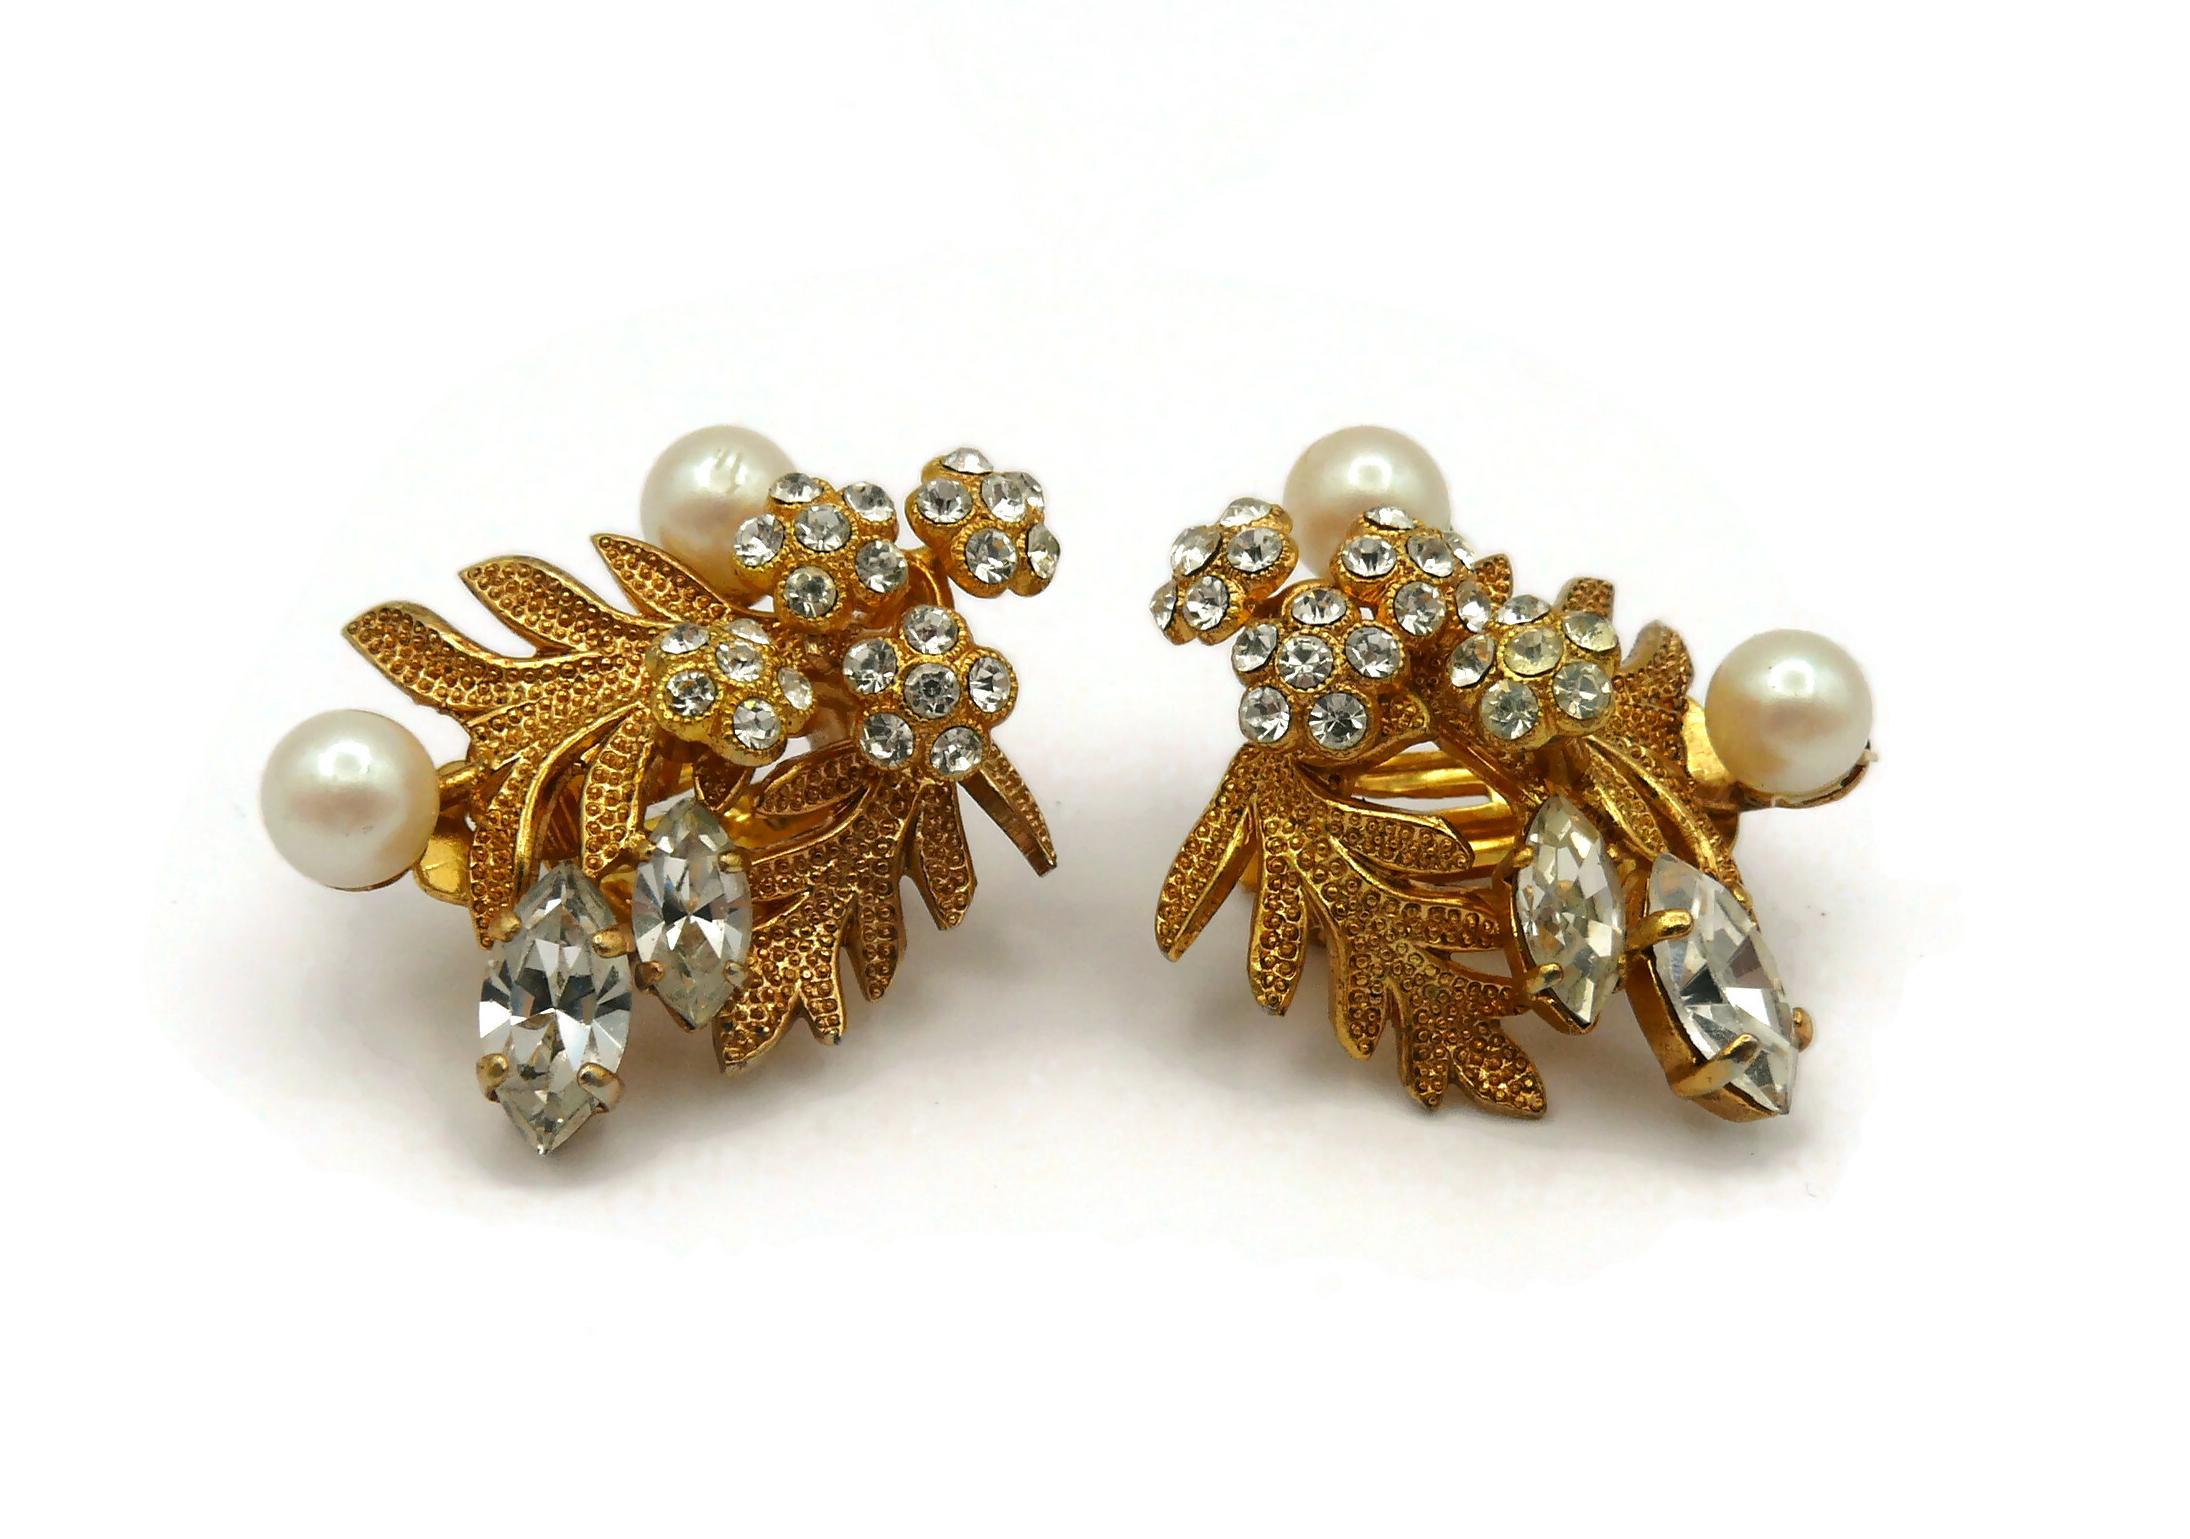 CHRISTIAN DIOR Vintage Jewelled Floral Clip-On Earrings, 1968 For Sale 1